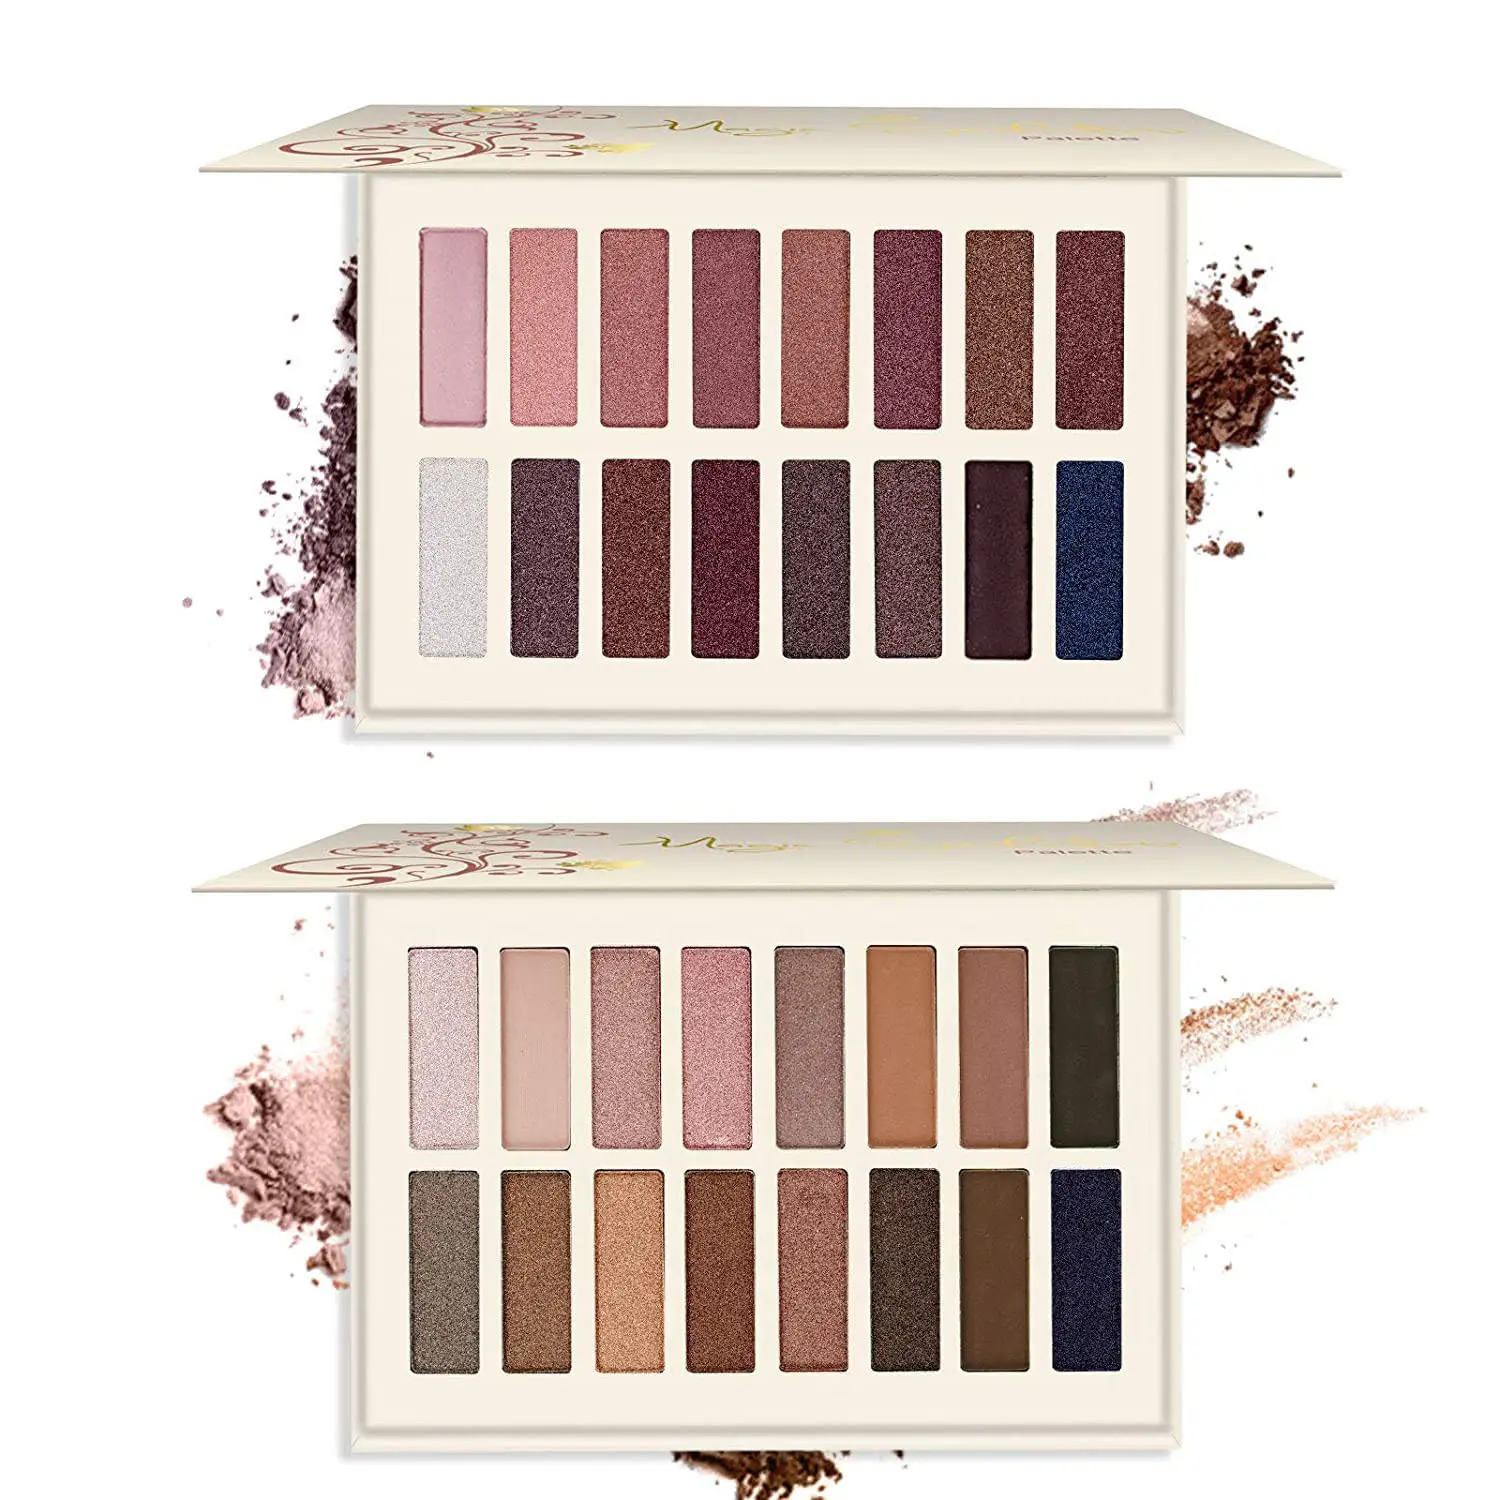 Own Brand High Color Rendering Dream Girl 16 Color Eye Shadow Palette Peach Makeup Daily Makeup